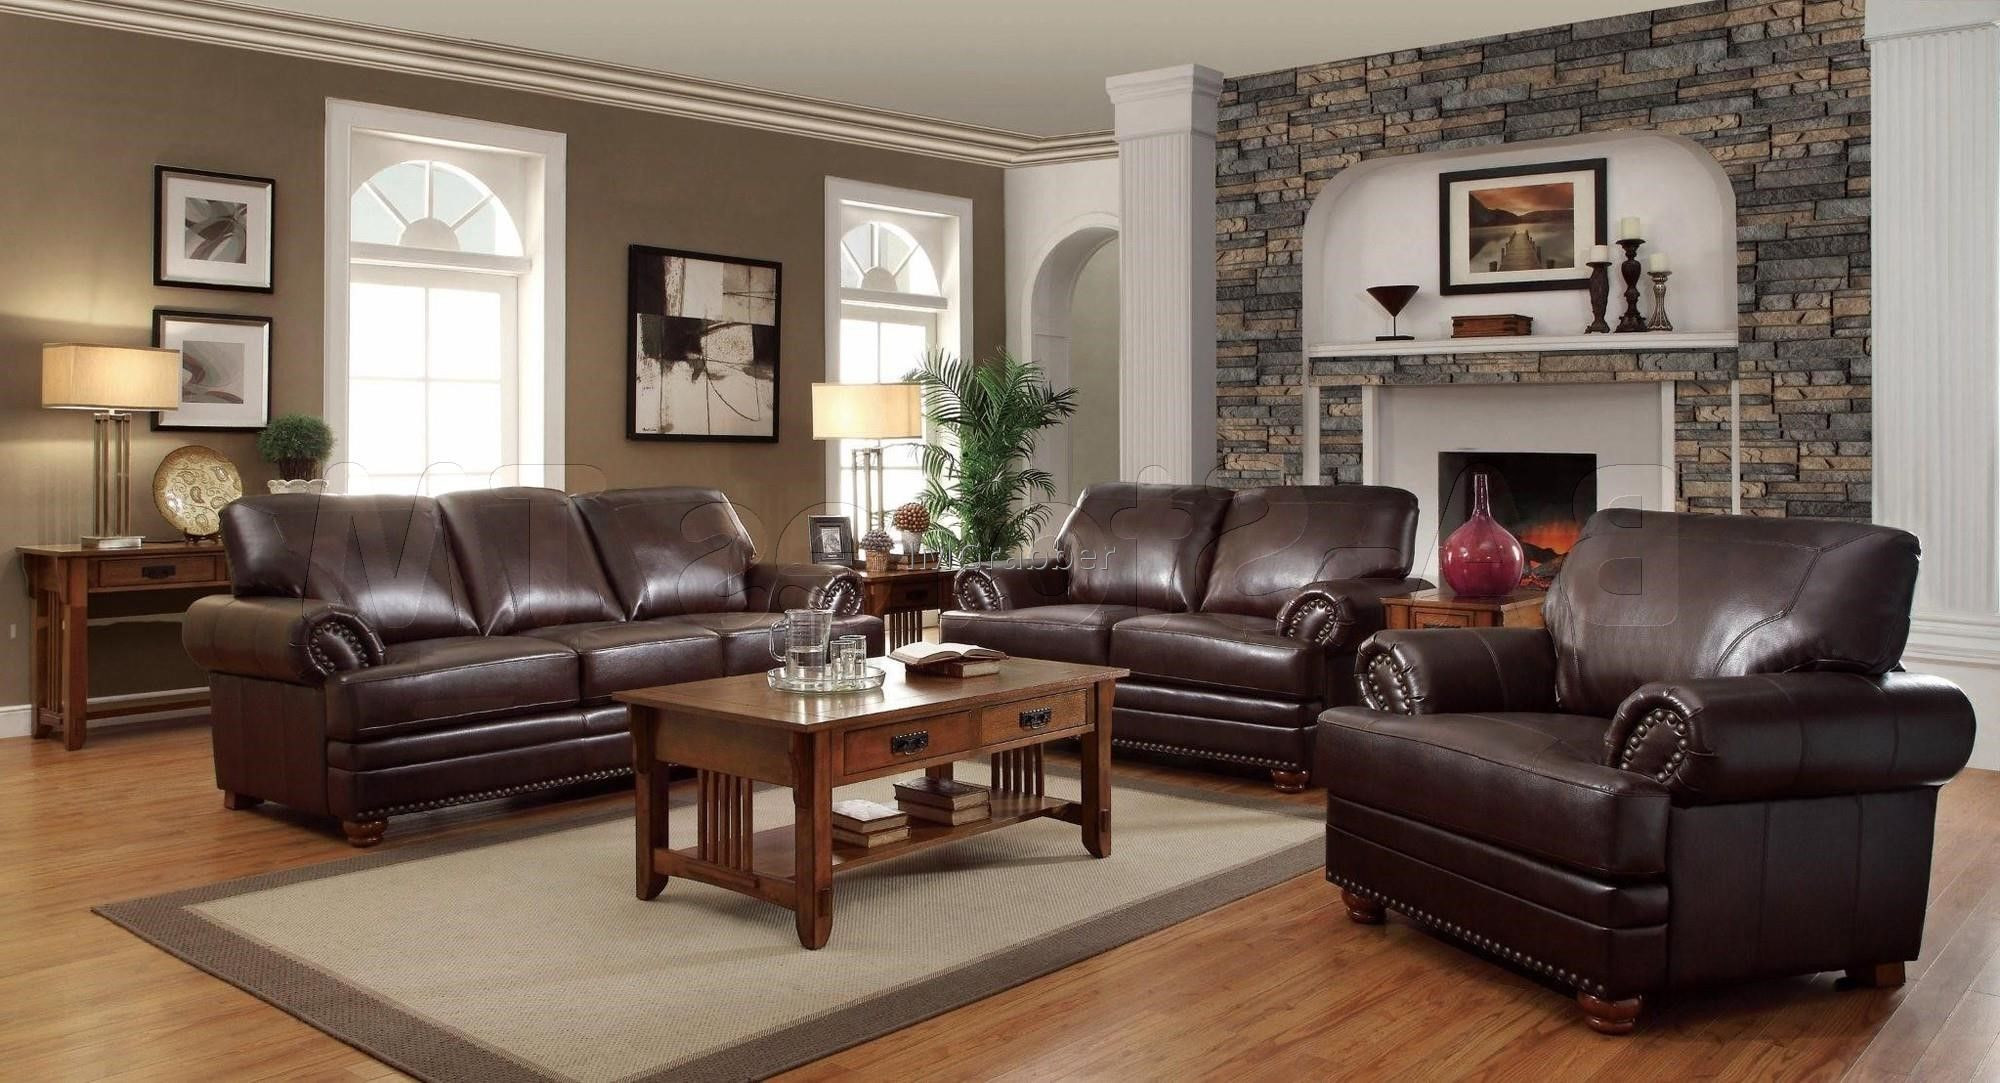 Brown Living Room Ideas
 Attractive Brown Couch Living Room Sofa Decorating Ideas